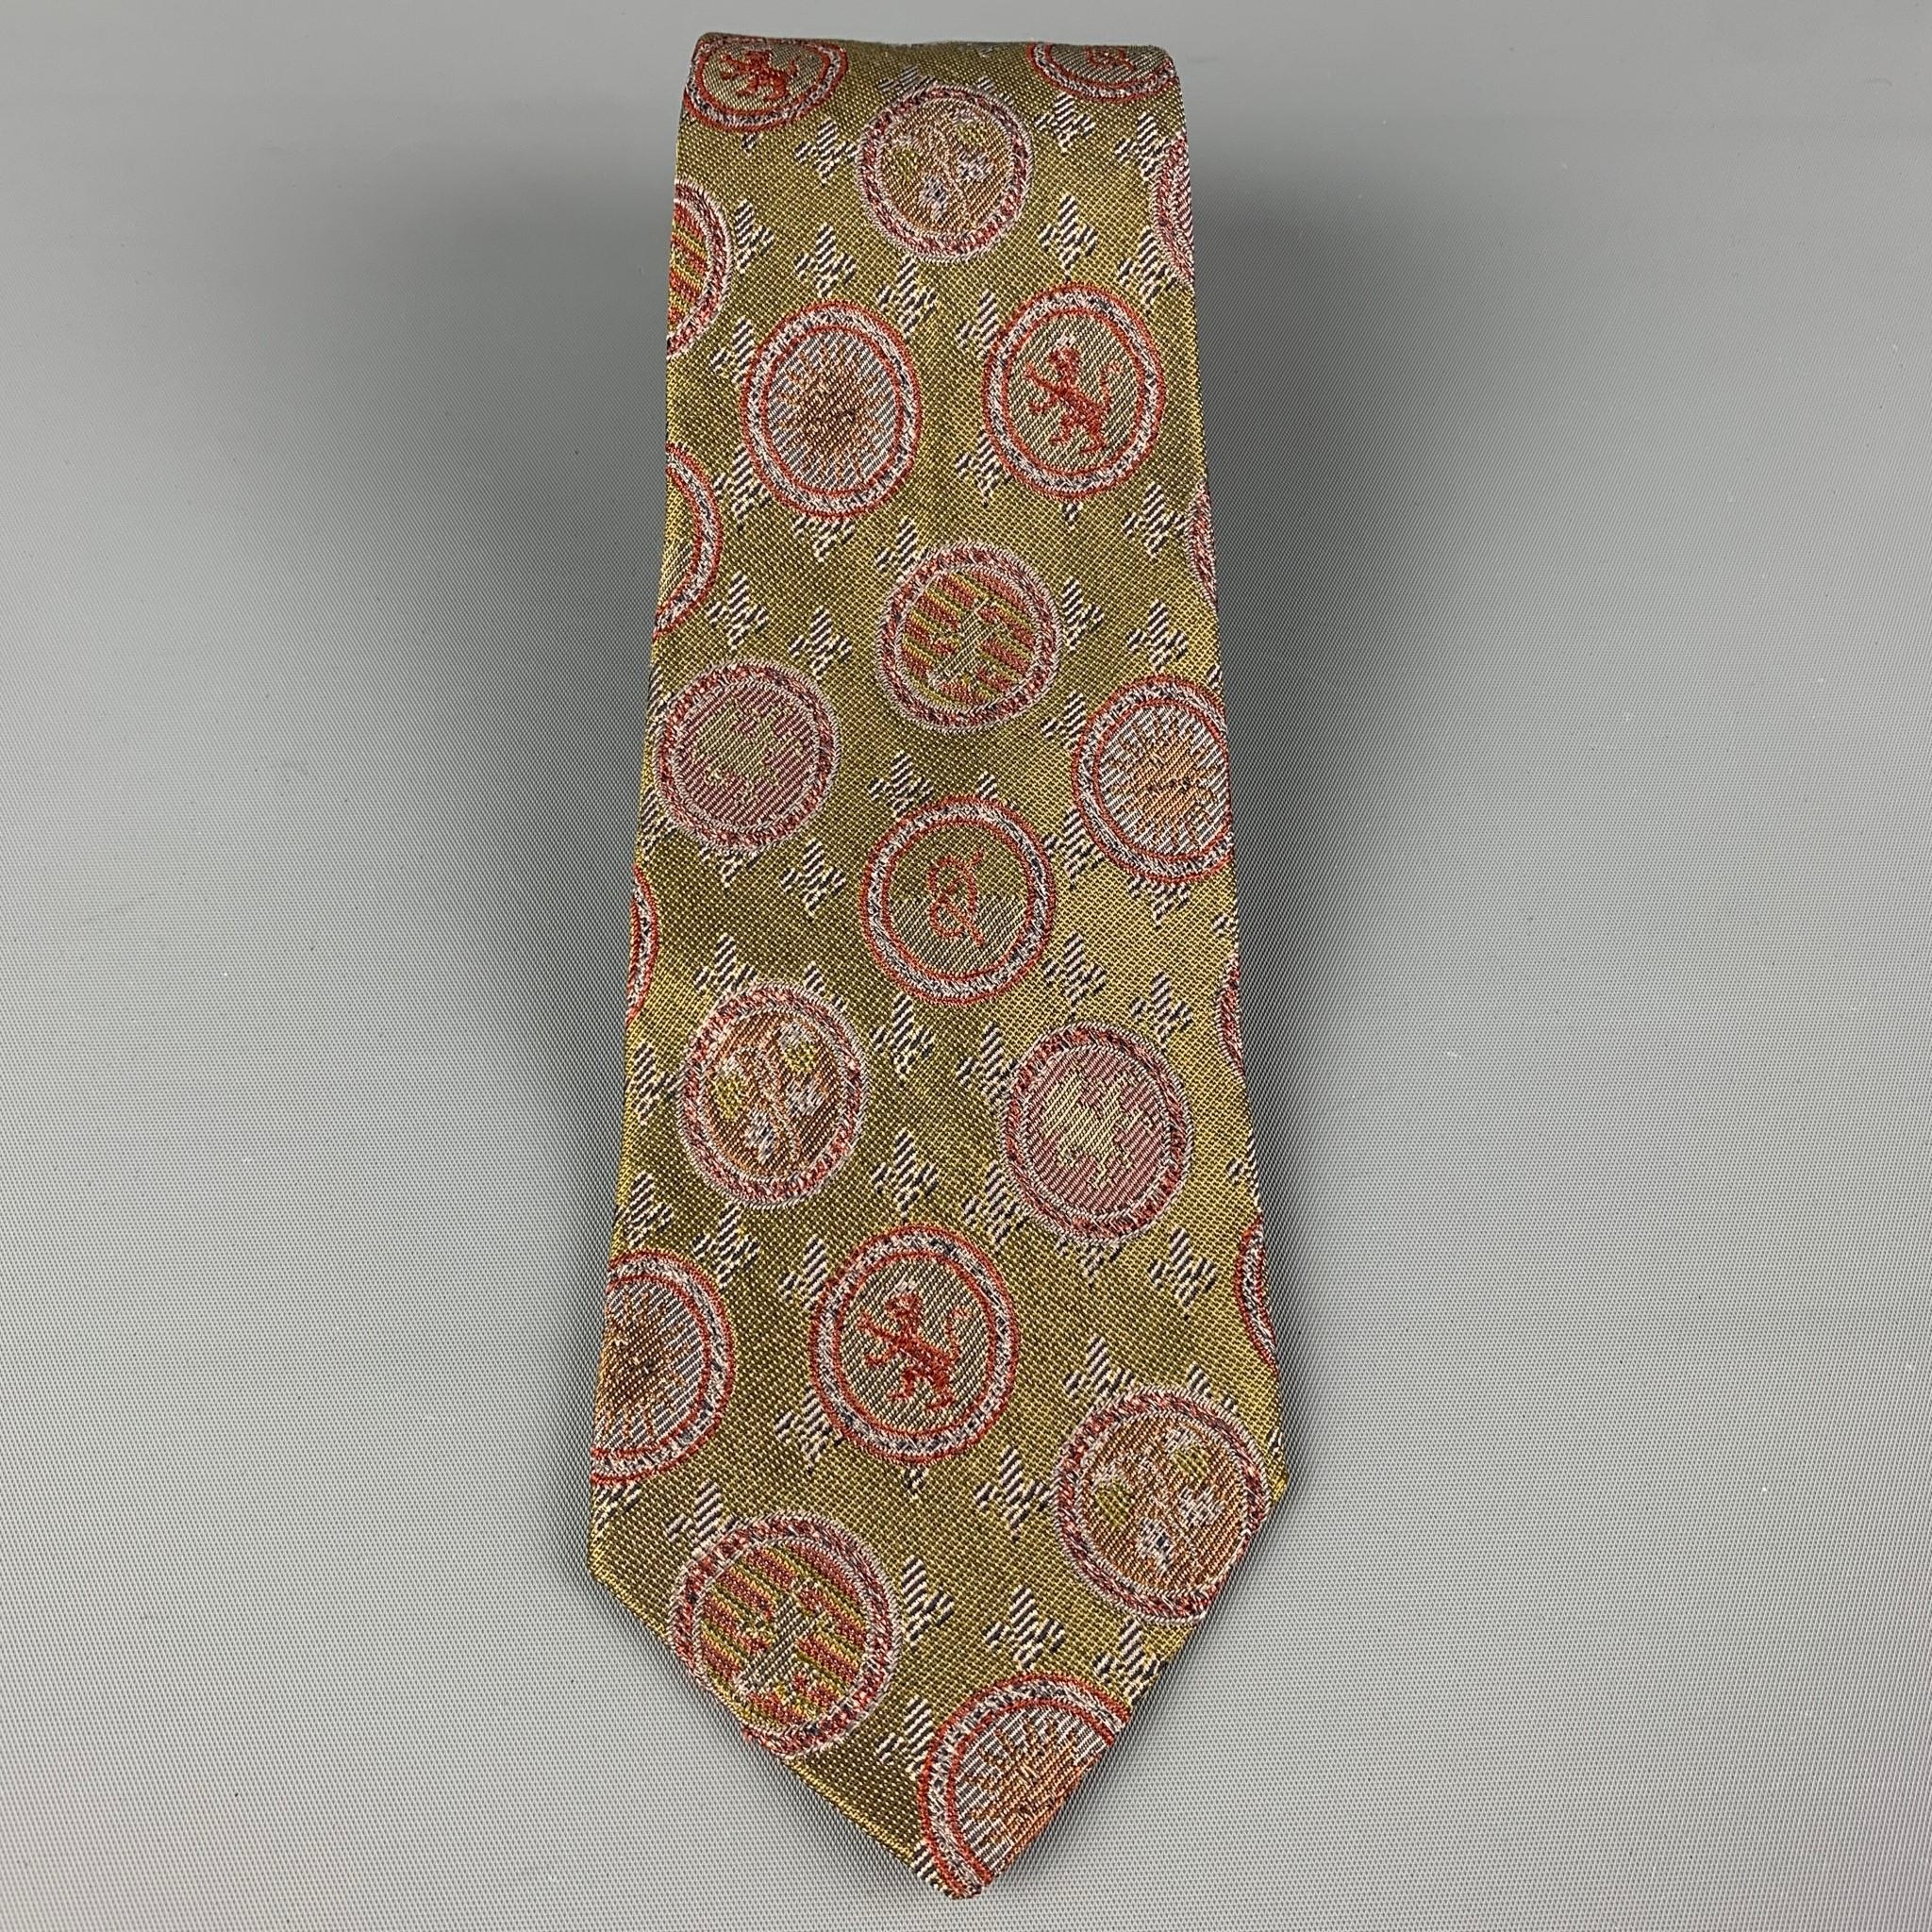 JEAN PAUL GAULTIER necktie comes in a olive & red silk blend with a all over crest print. Made in Italy .

Very Good Pre-Owned Condition.

Width: 3.25 in.
Length: 60 in. 